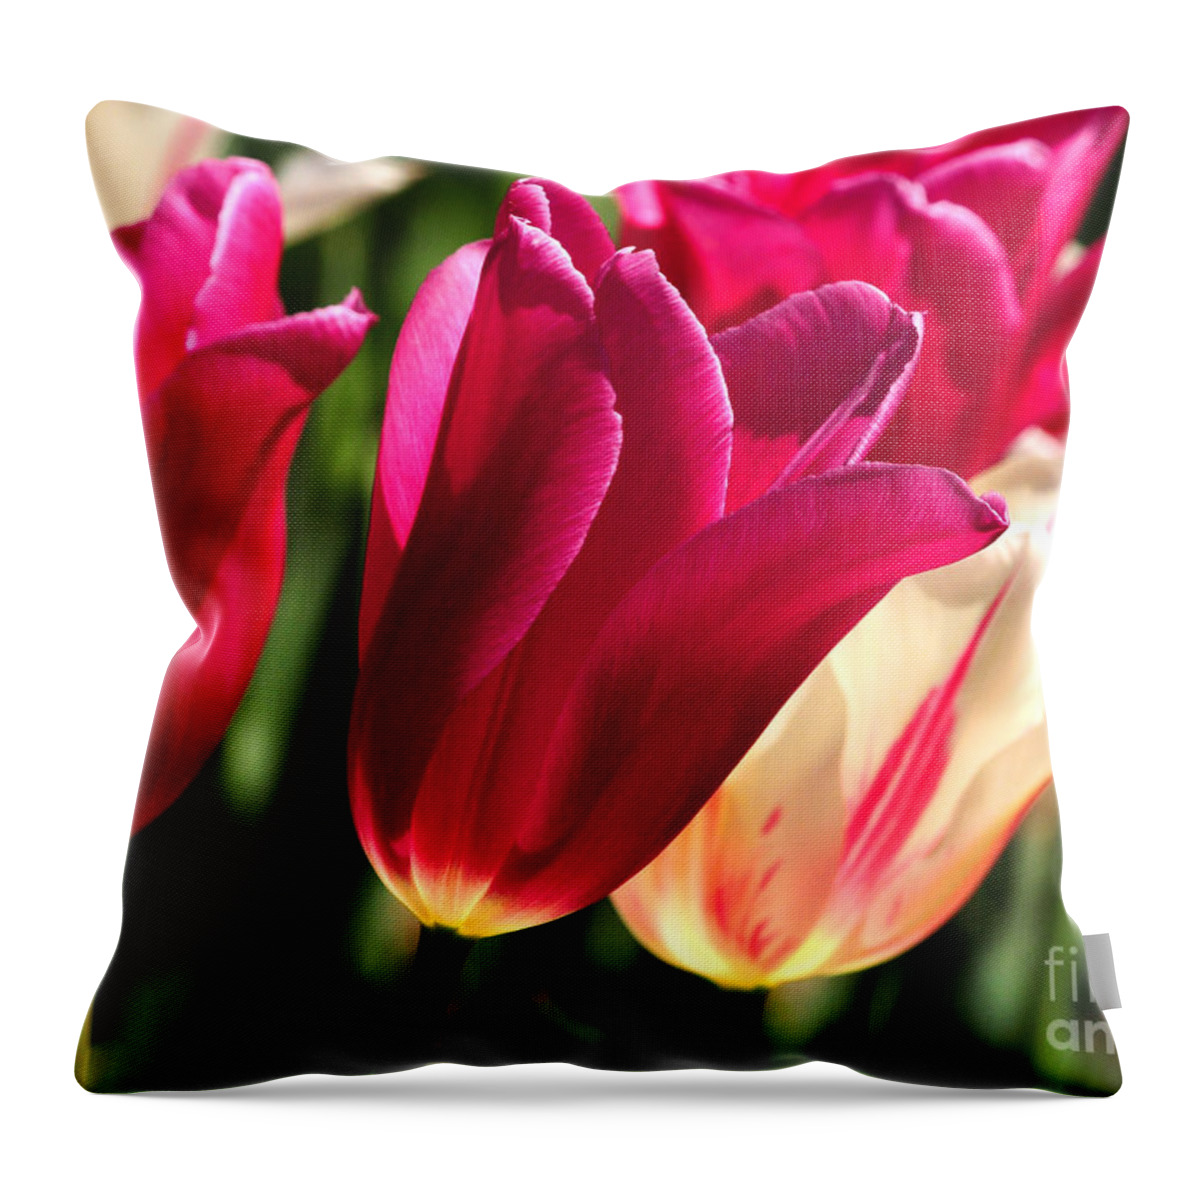 Nature Throw Pillow featuring the photograph Satin Tulips by Olivia Hardwicke